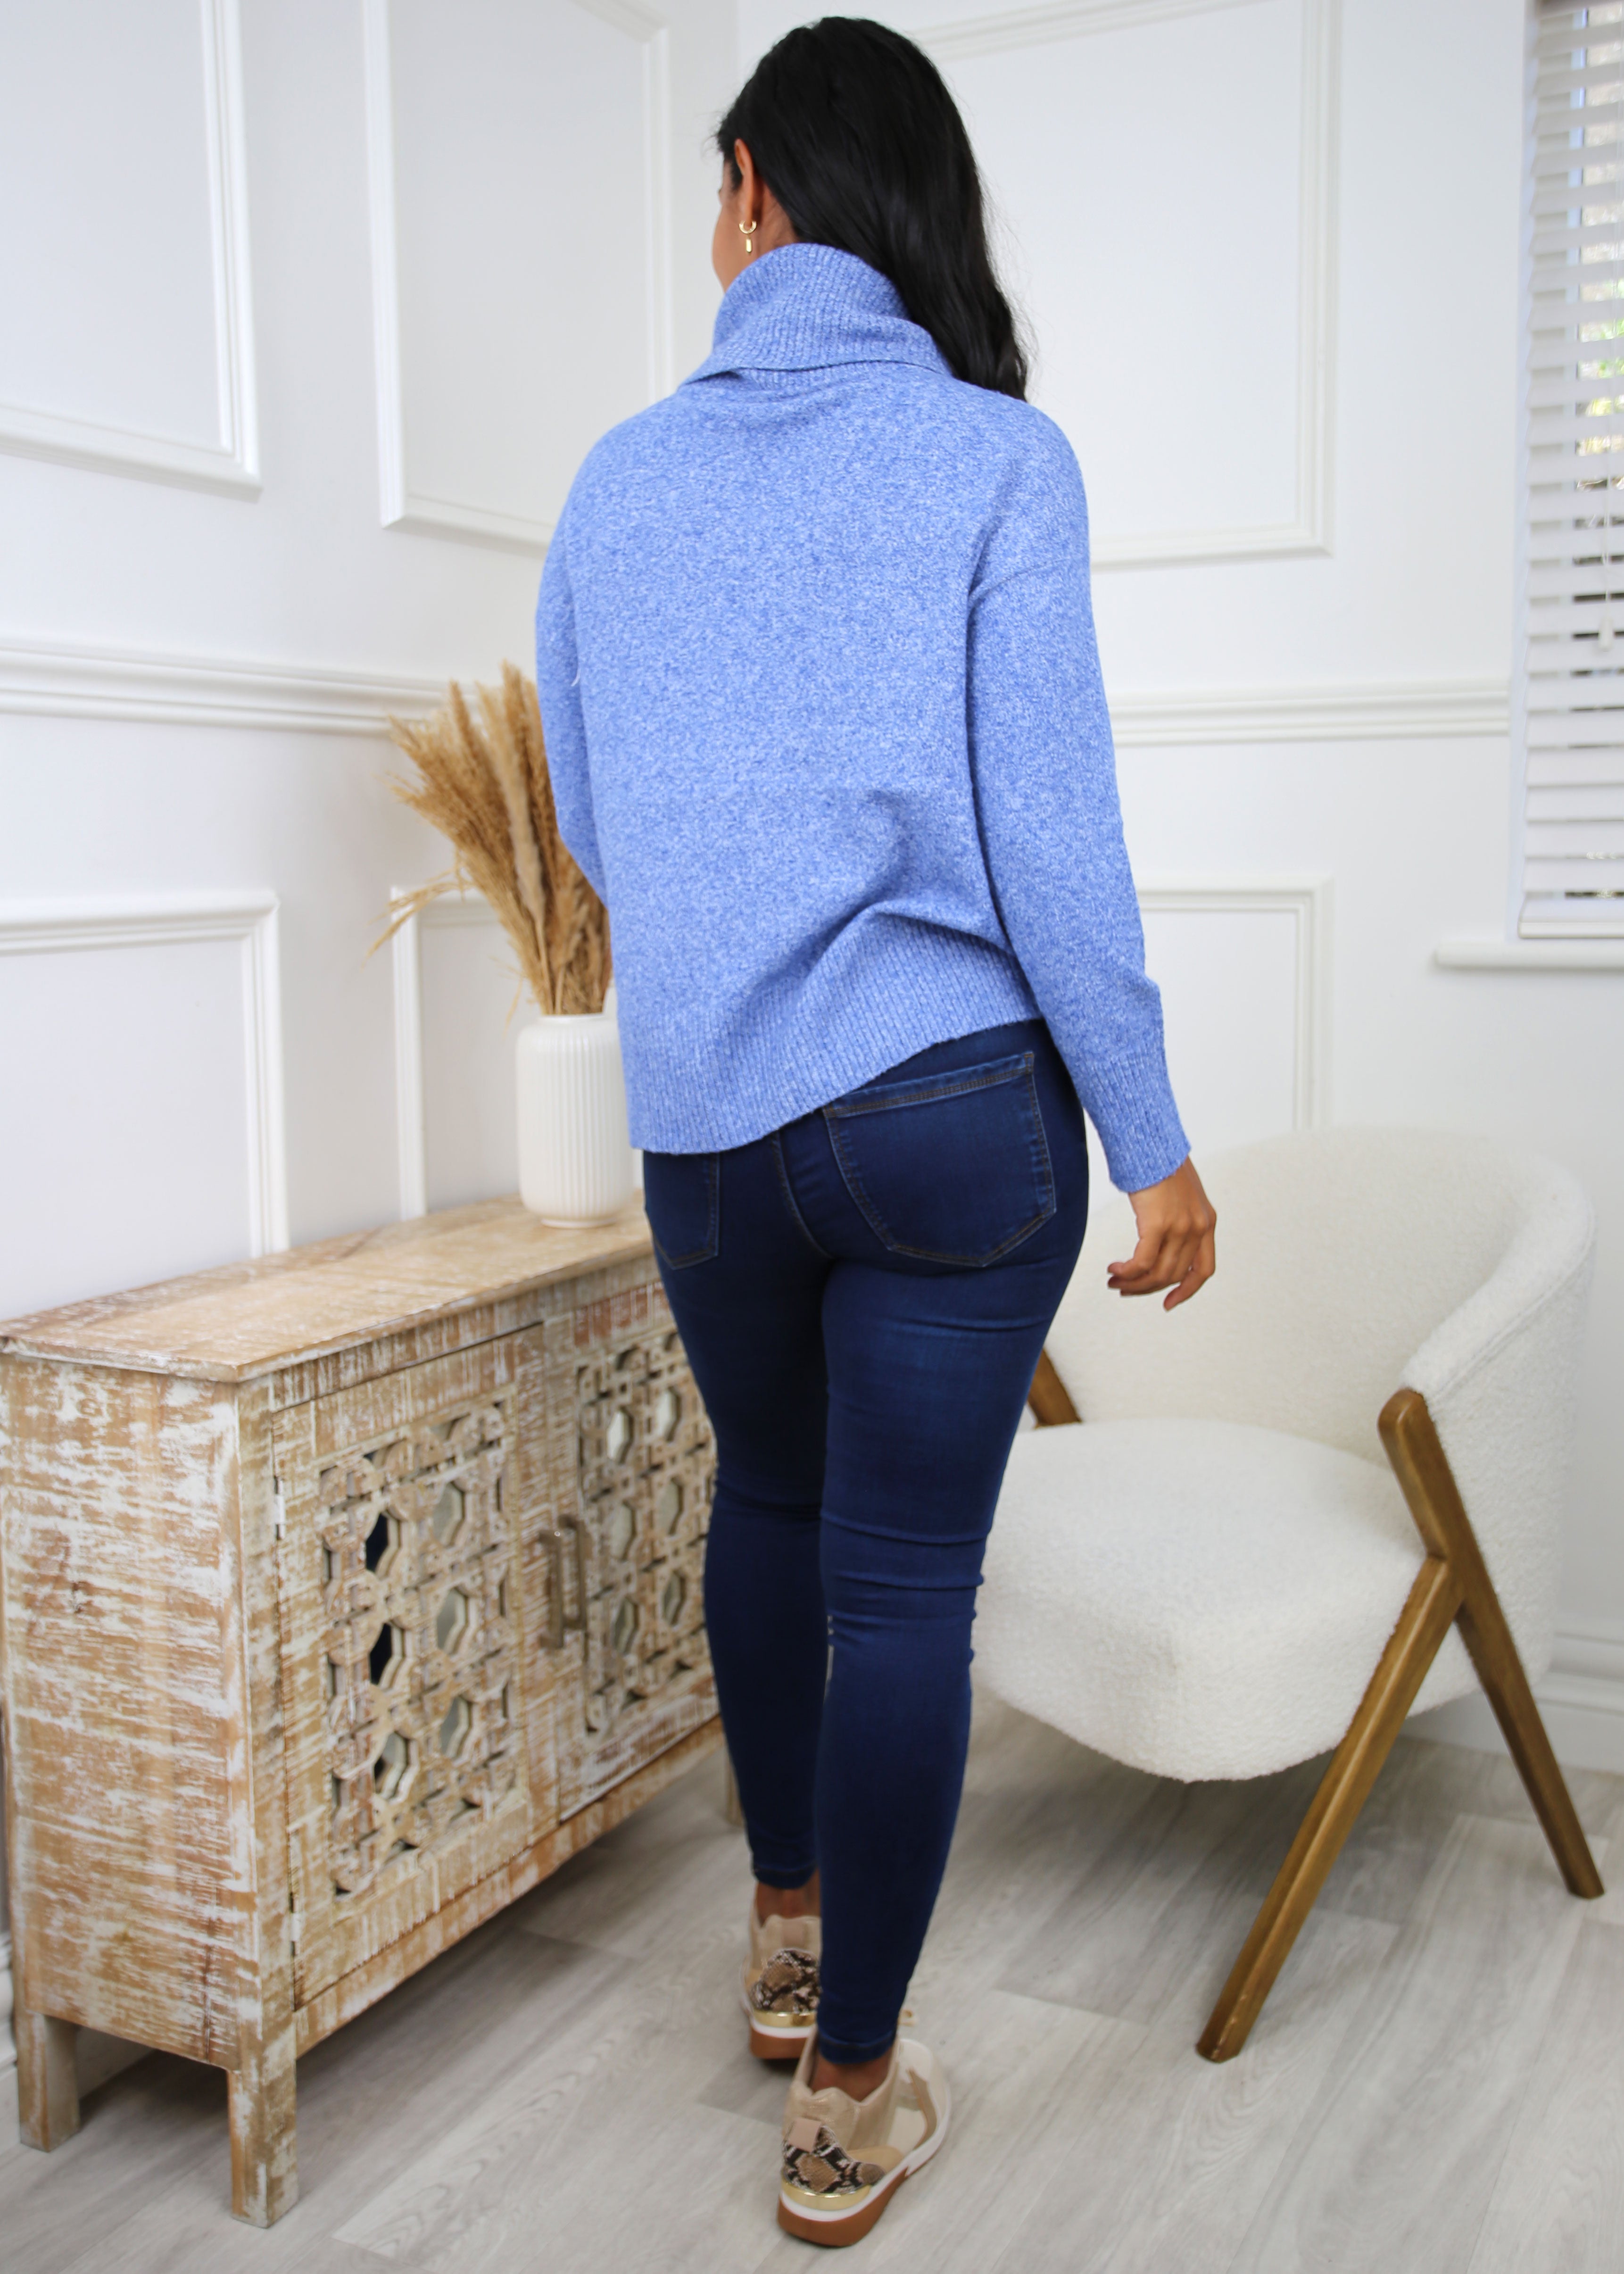 Doffy Beaucoup Blue Cowlneck Pullover